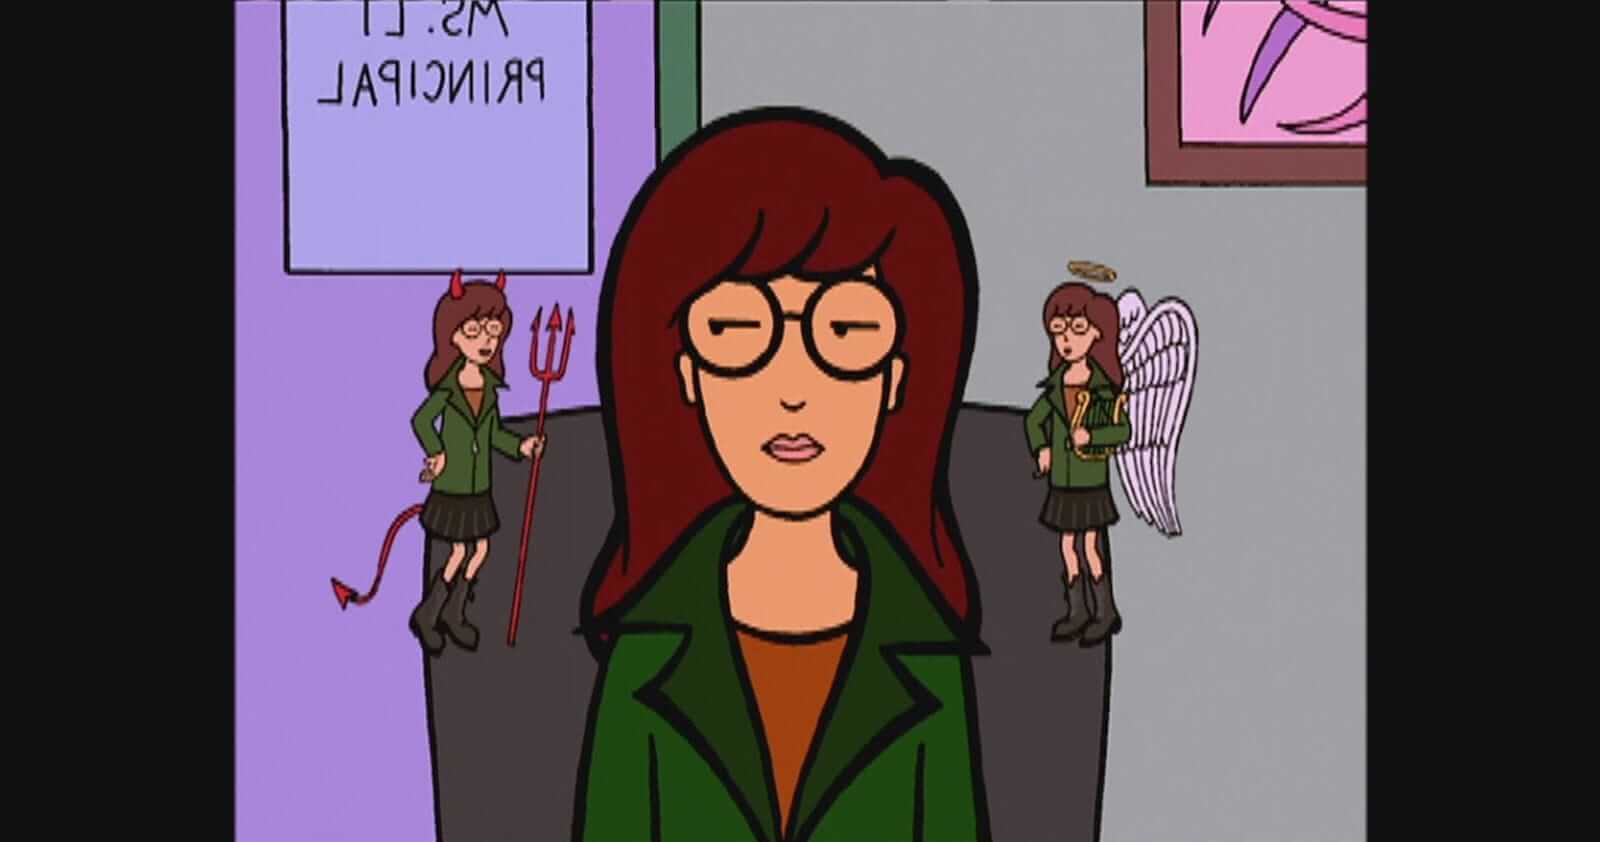 Internal and External Conflict - Daria